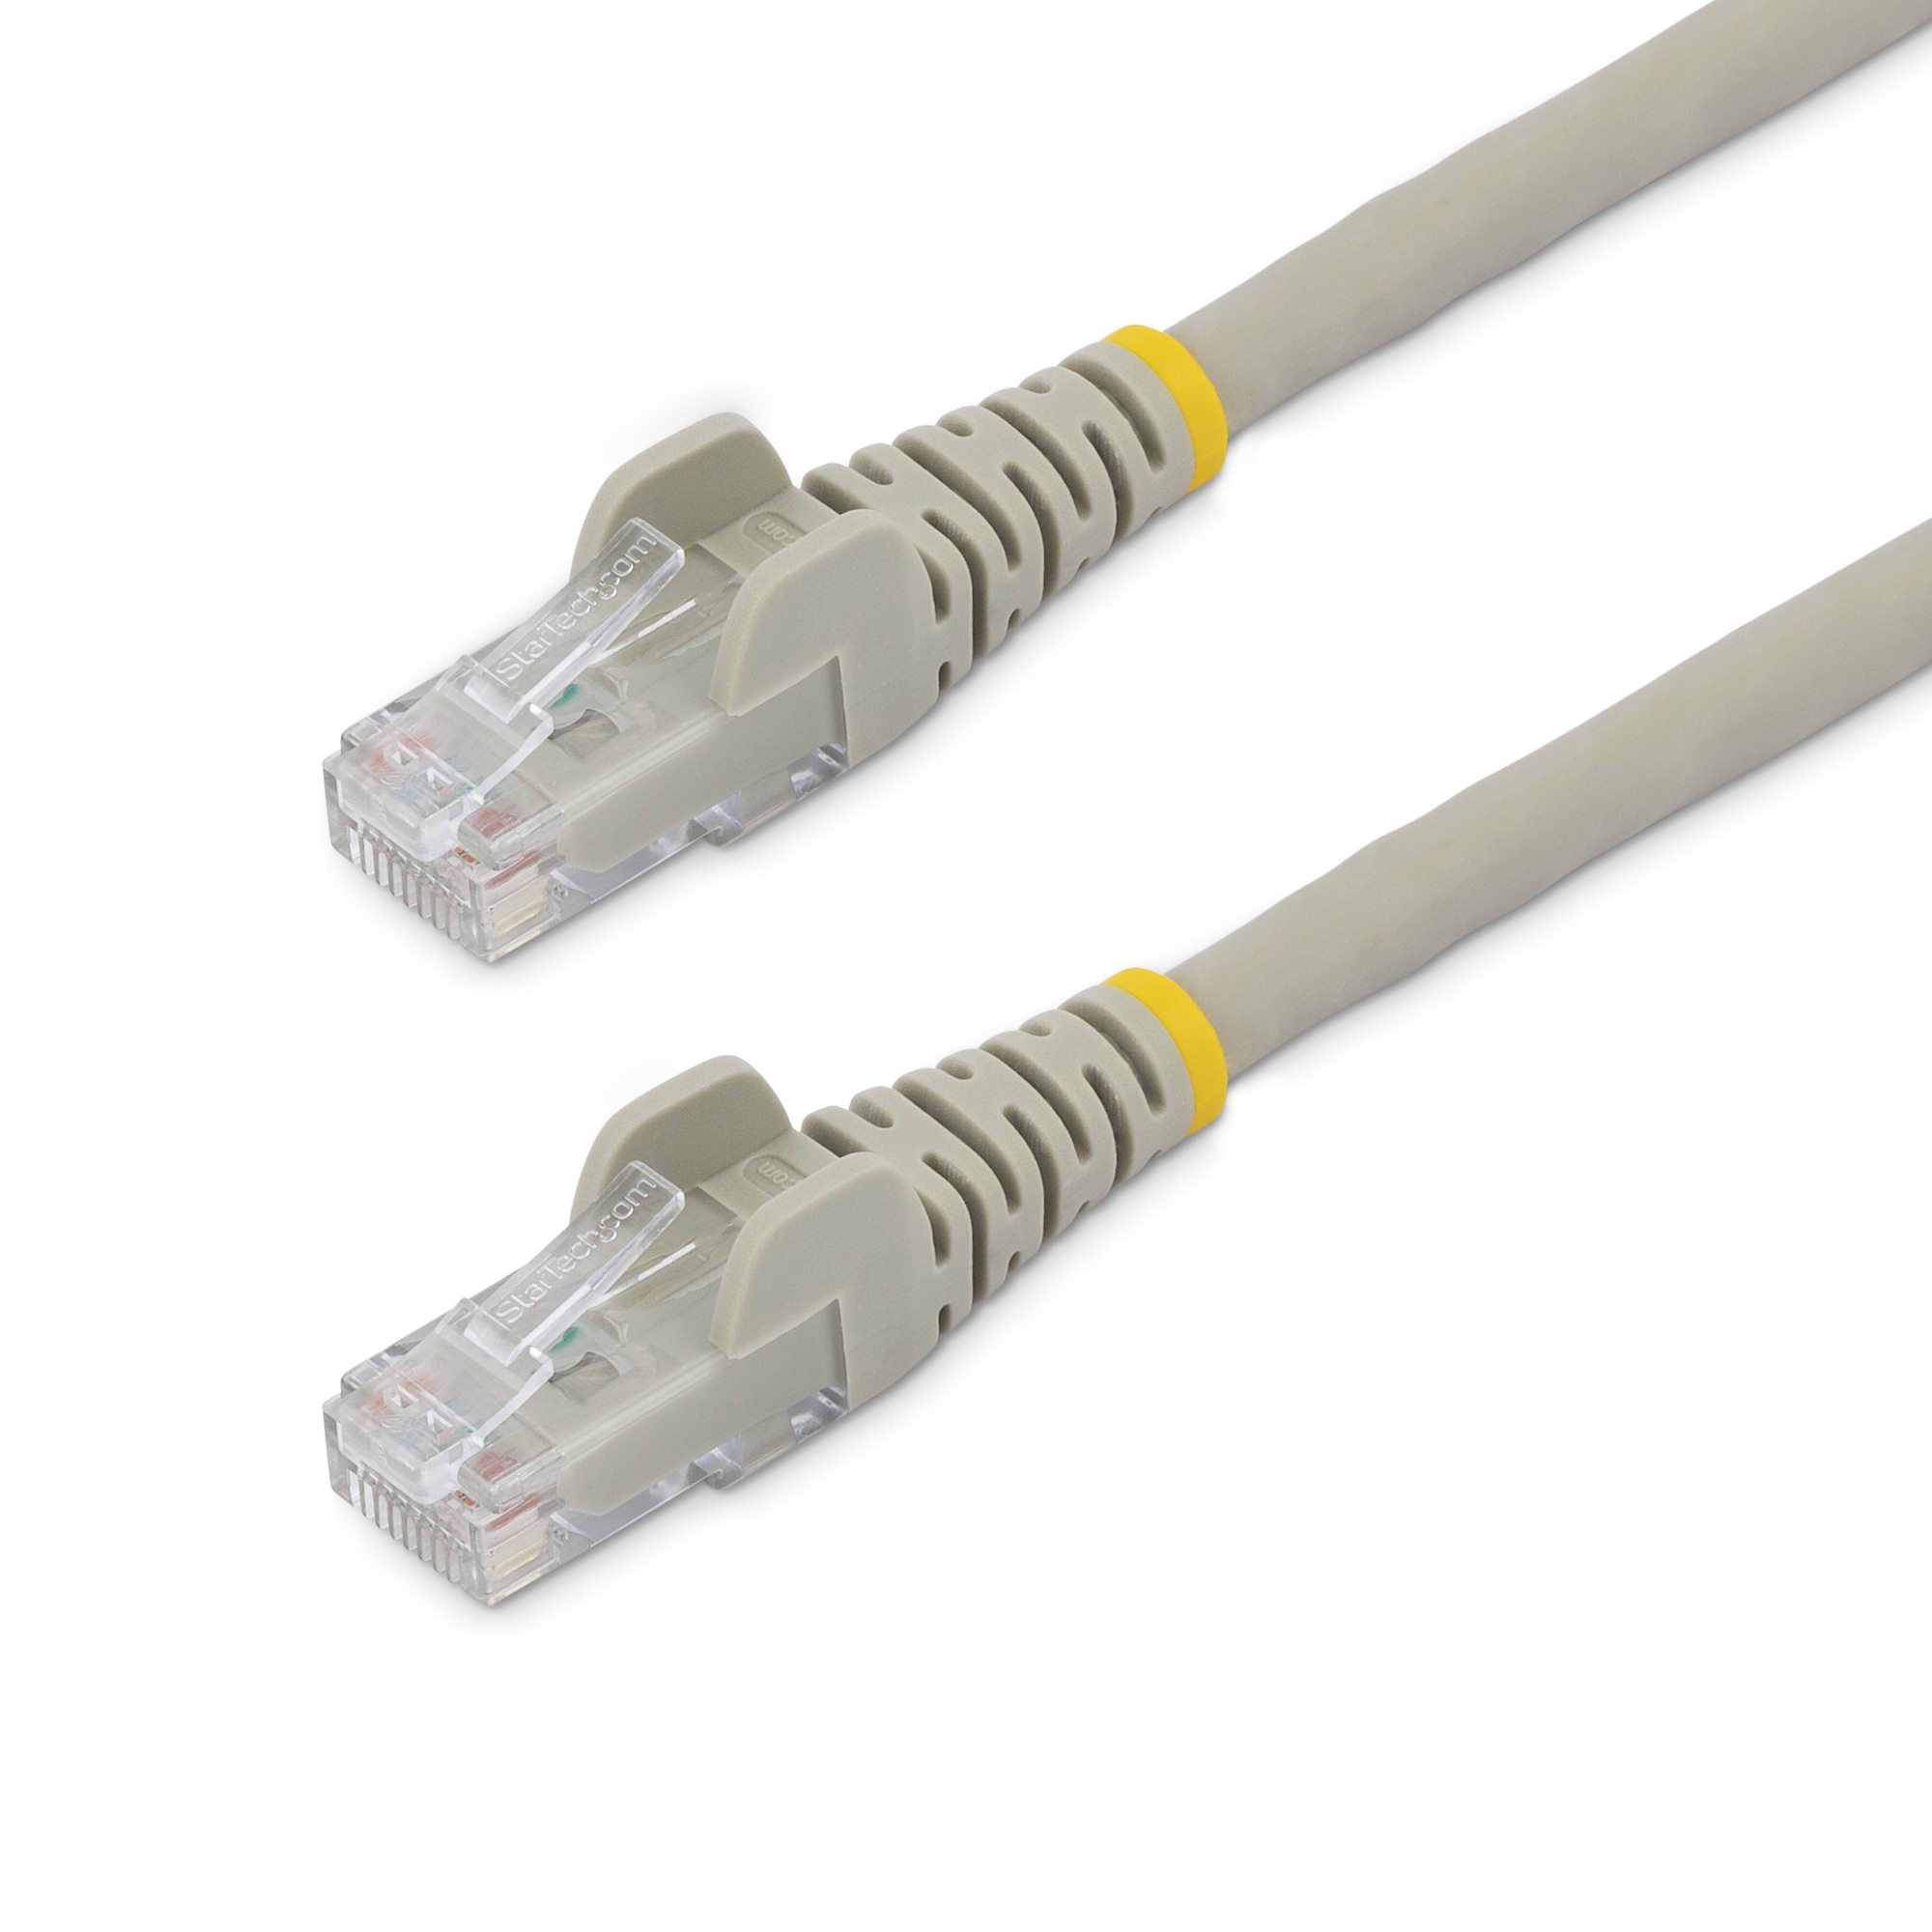 1ft (30cm) CAT6 Ethernet Cable - LSZH (Low Smoke Zero Halogen) - 10 Gigabit  650MHz 100W PoE RJ45 UTP Network Patch Cord Snagless with Strain Relief 